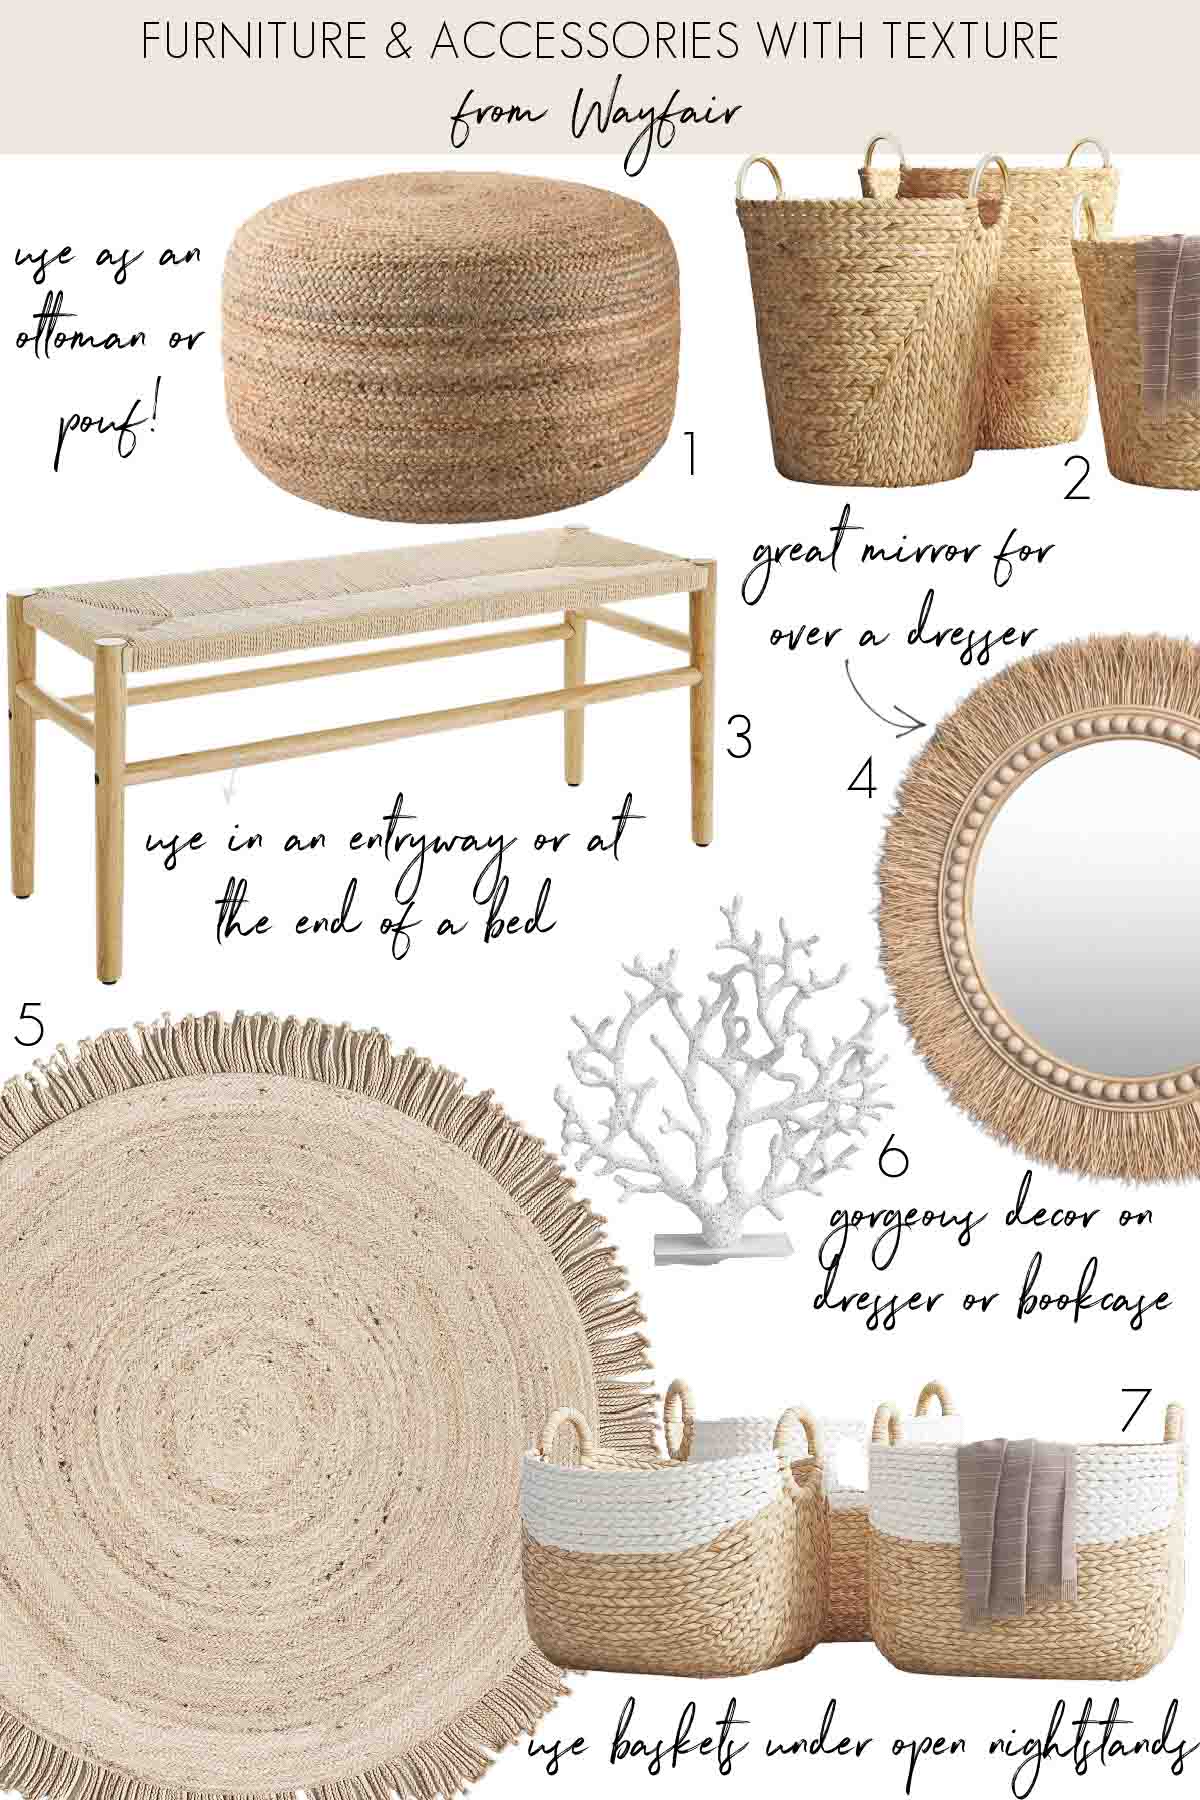 Furniture and accessories with texture